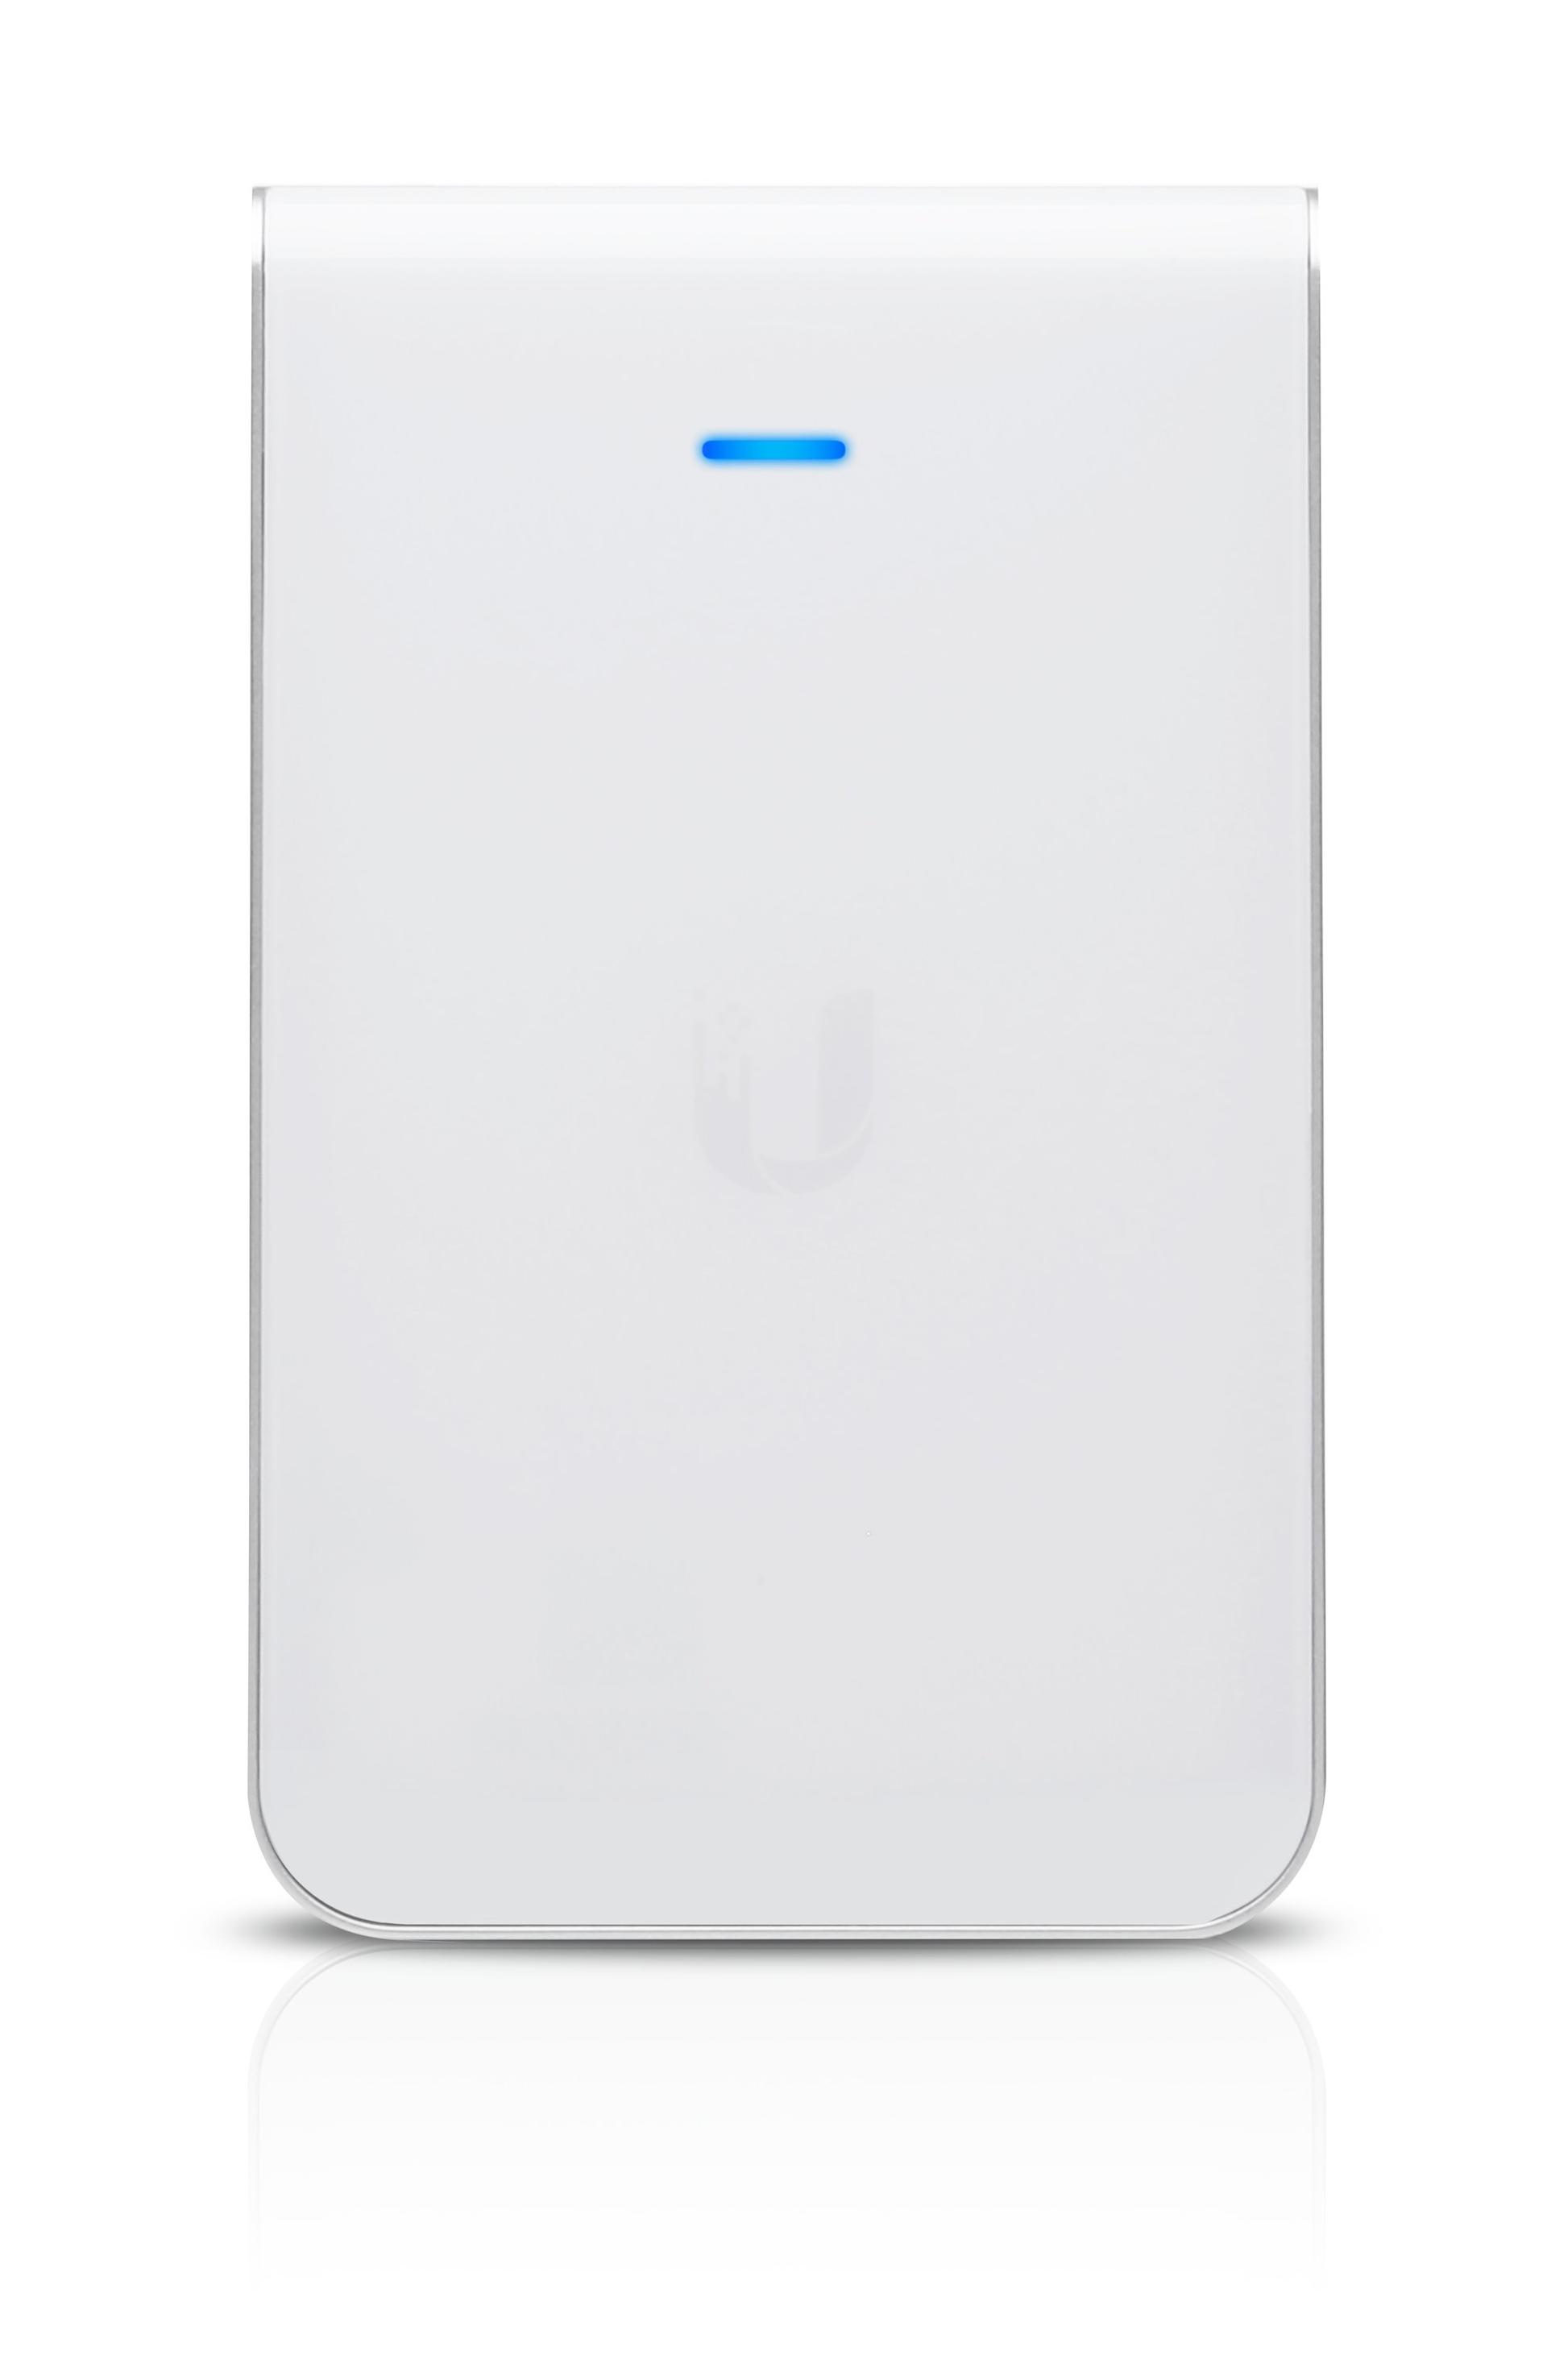 Ubiquiti UniFi UAP-IW-HD In-Wall Access Point Front Image